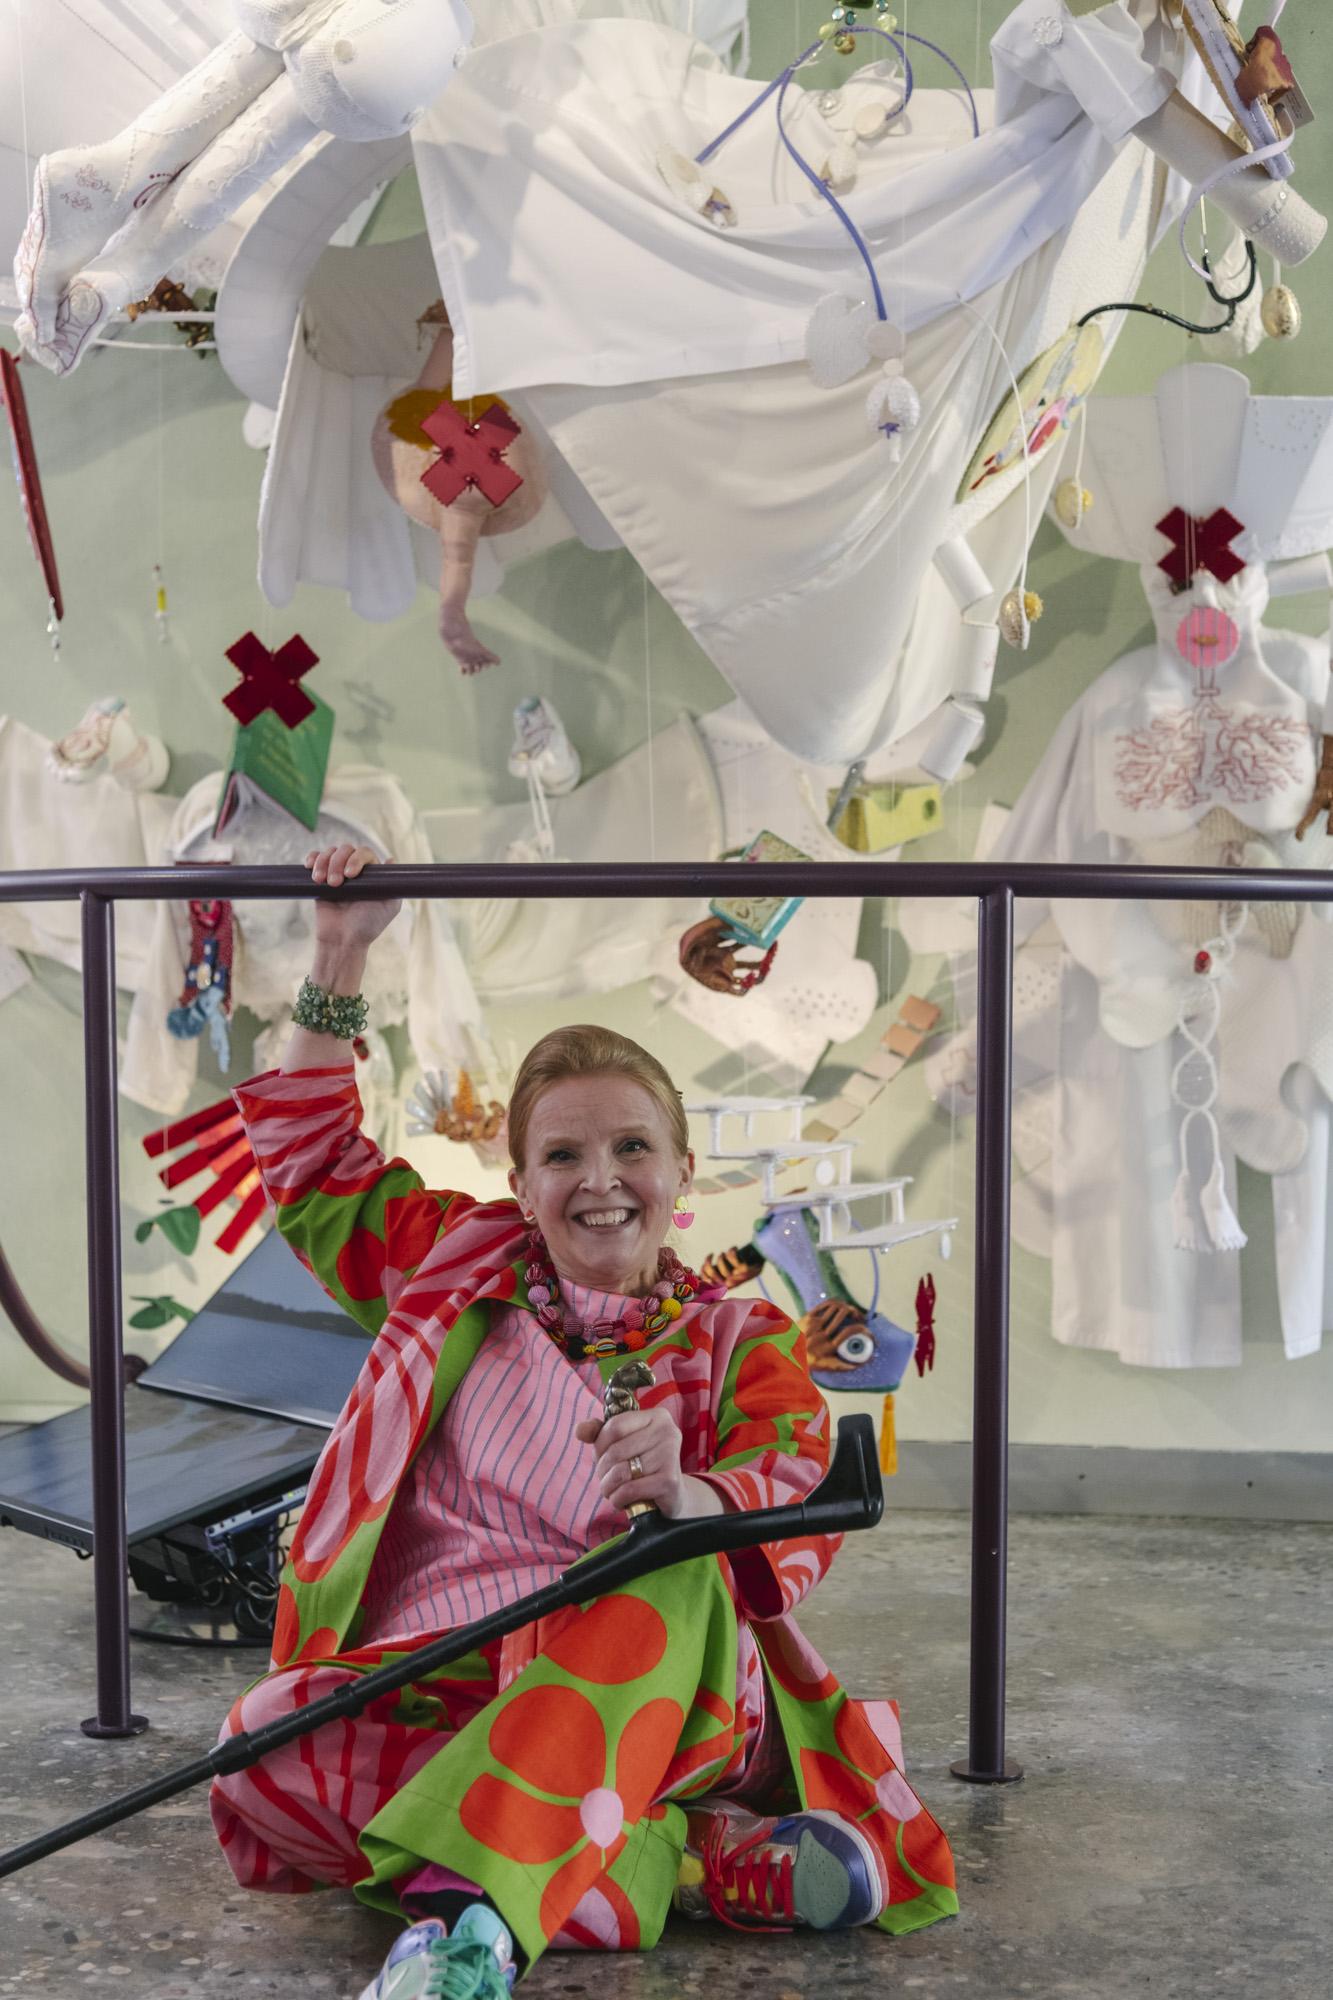 Artist Jenni-Juulia Wallinheimo-Heimonen sitting on the floor in front of a large white textile installation with a lot of colorful details. Jenni-Juulia is wearing a red and green suit with patterns and holding a cane.